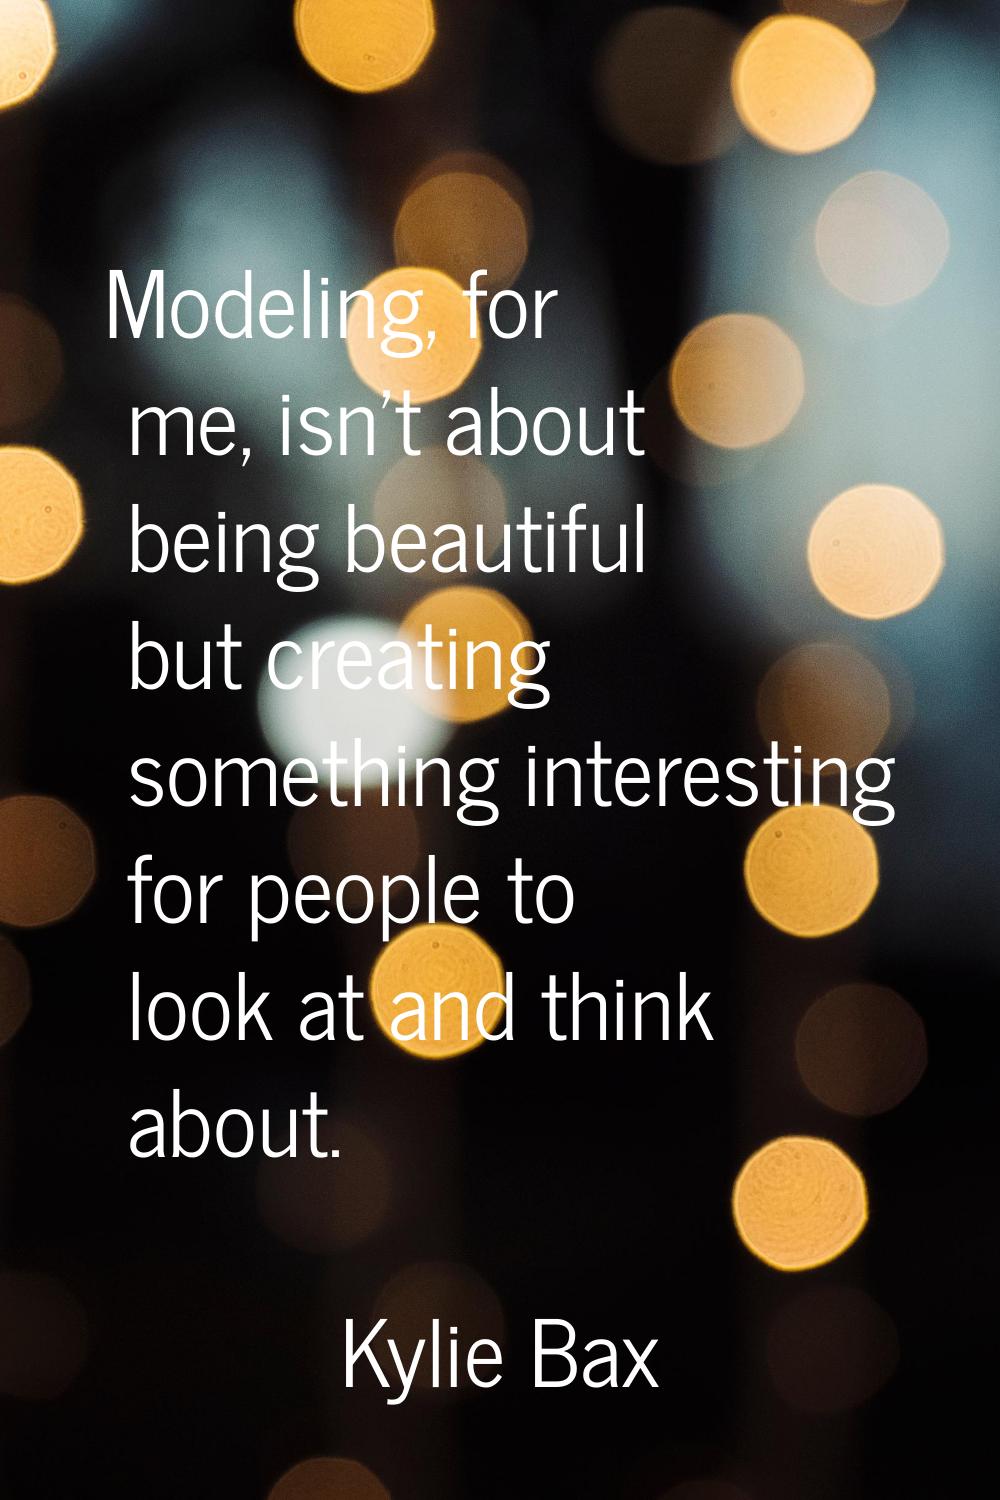 Modeling, for me, isn't about being beautiful but creating something interesting for people to look